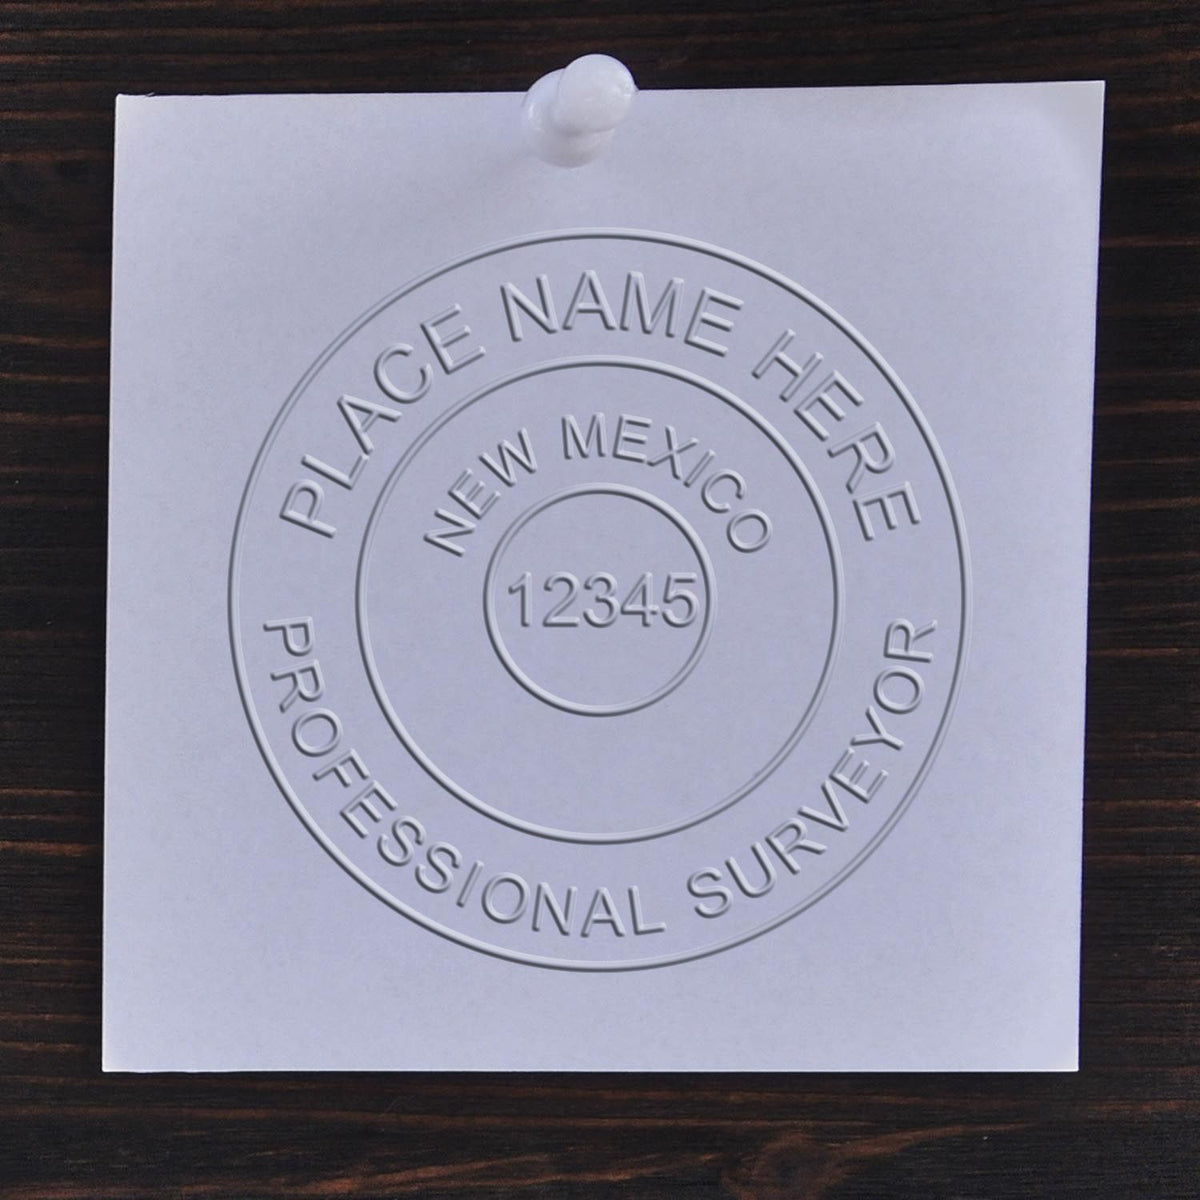 An in use photo of the Hybrid New Mexico Land Surveyor Seal showing a sample imprint on a cardstock